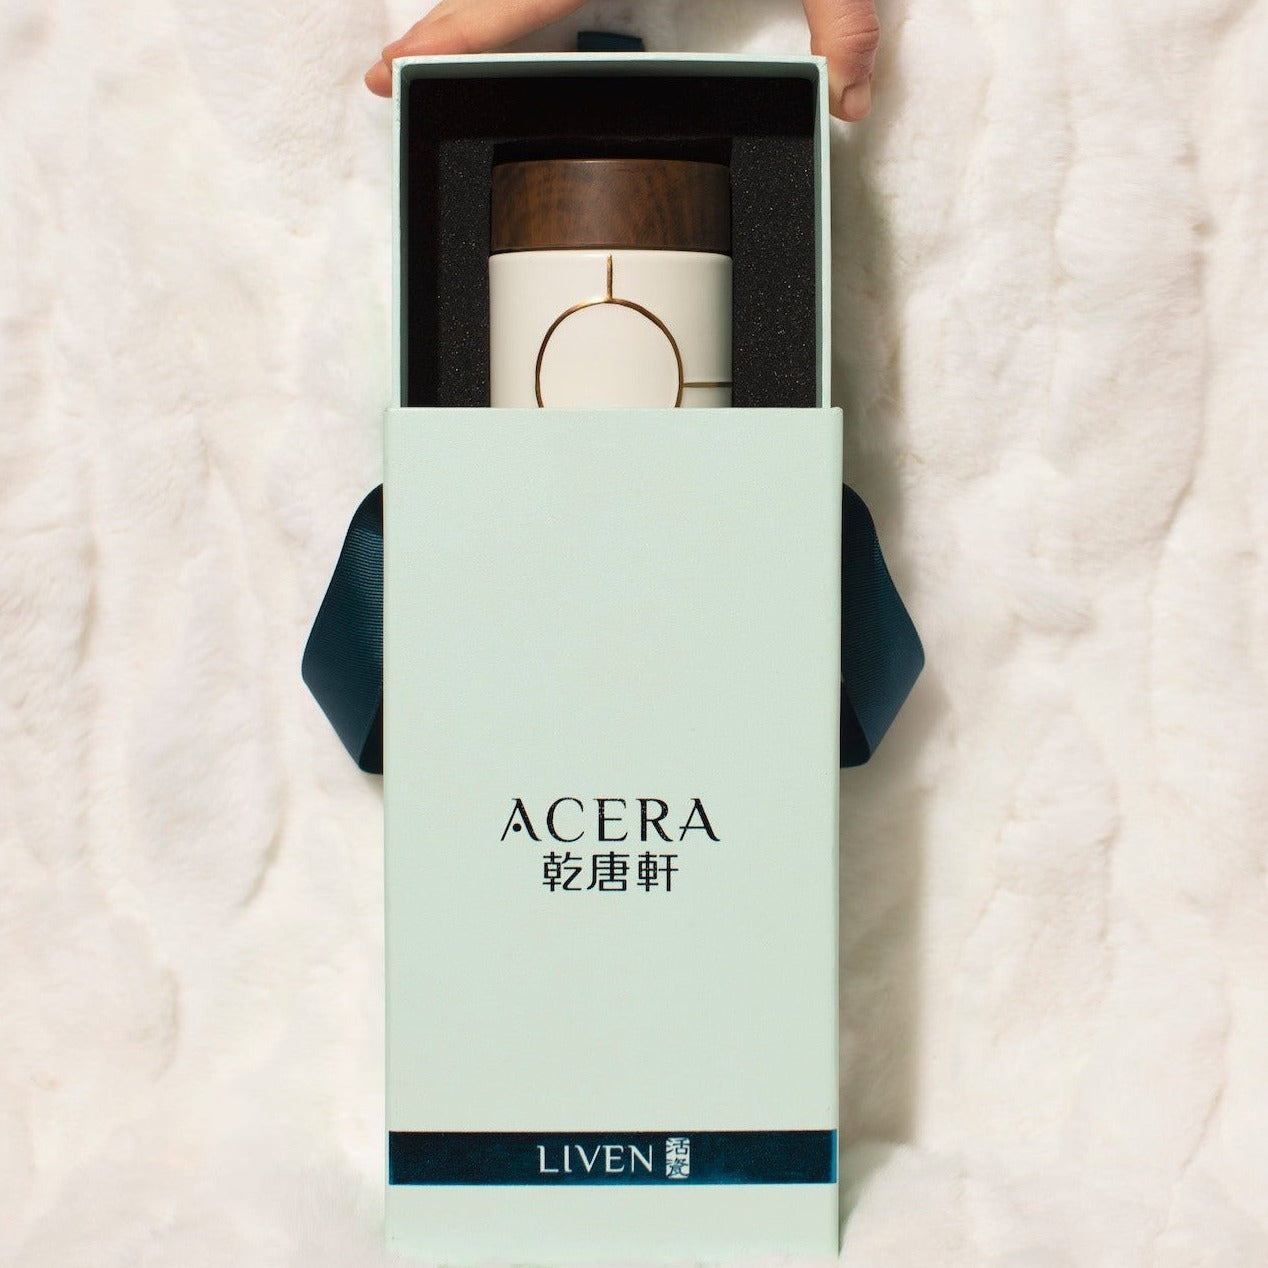 The Dream Tumbler by ACERA LIVEN